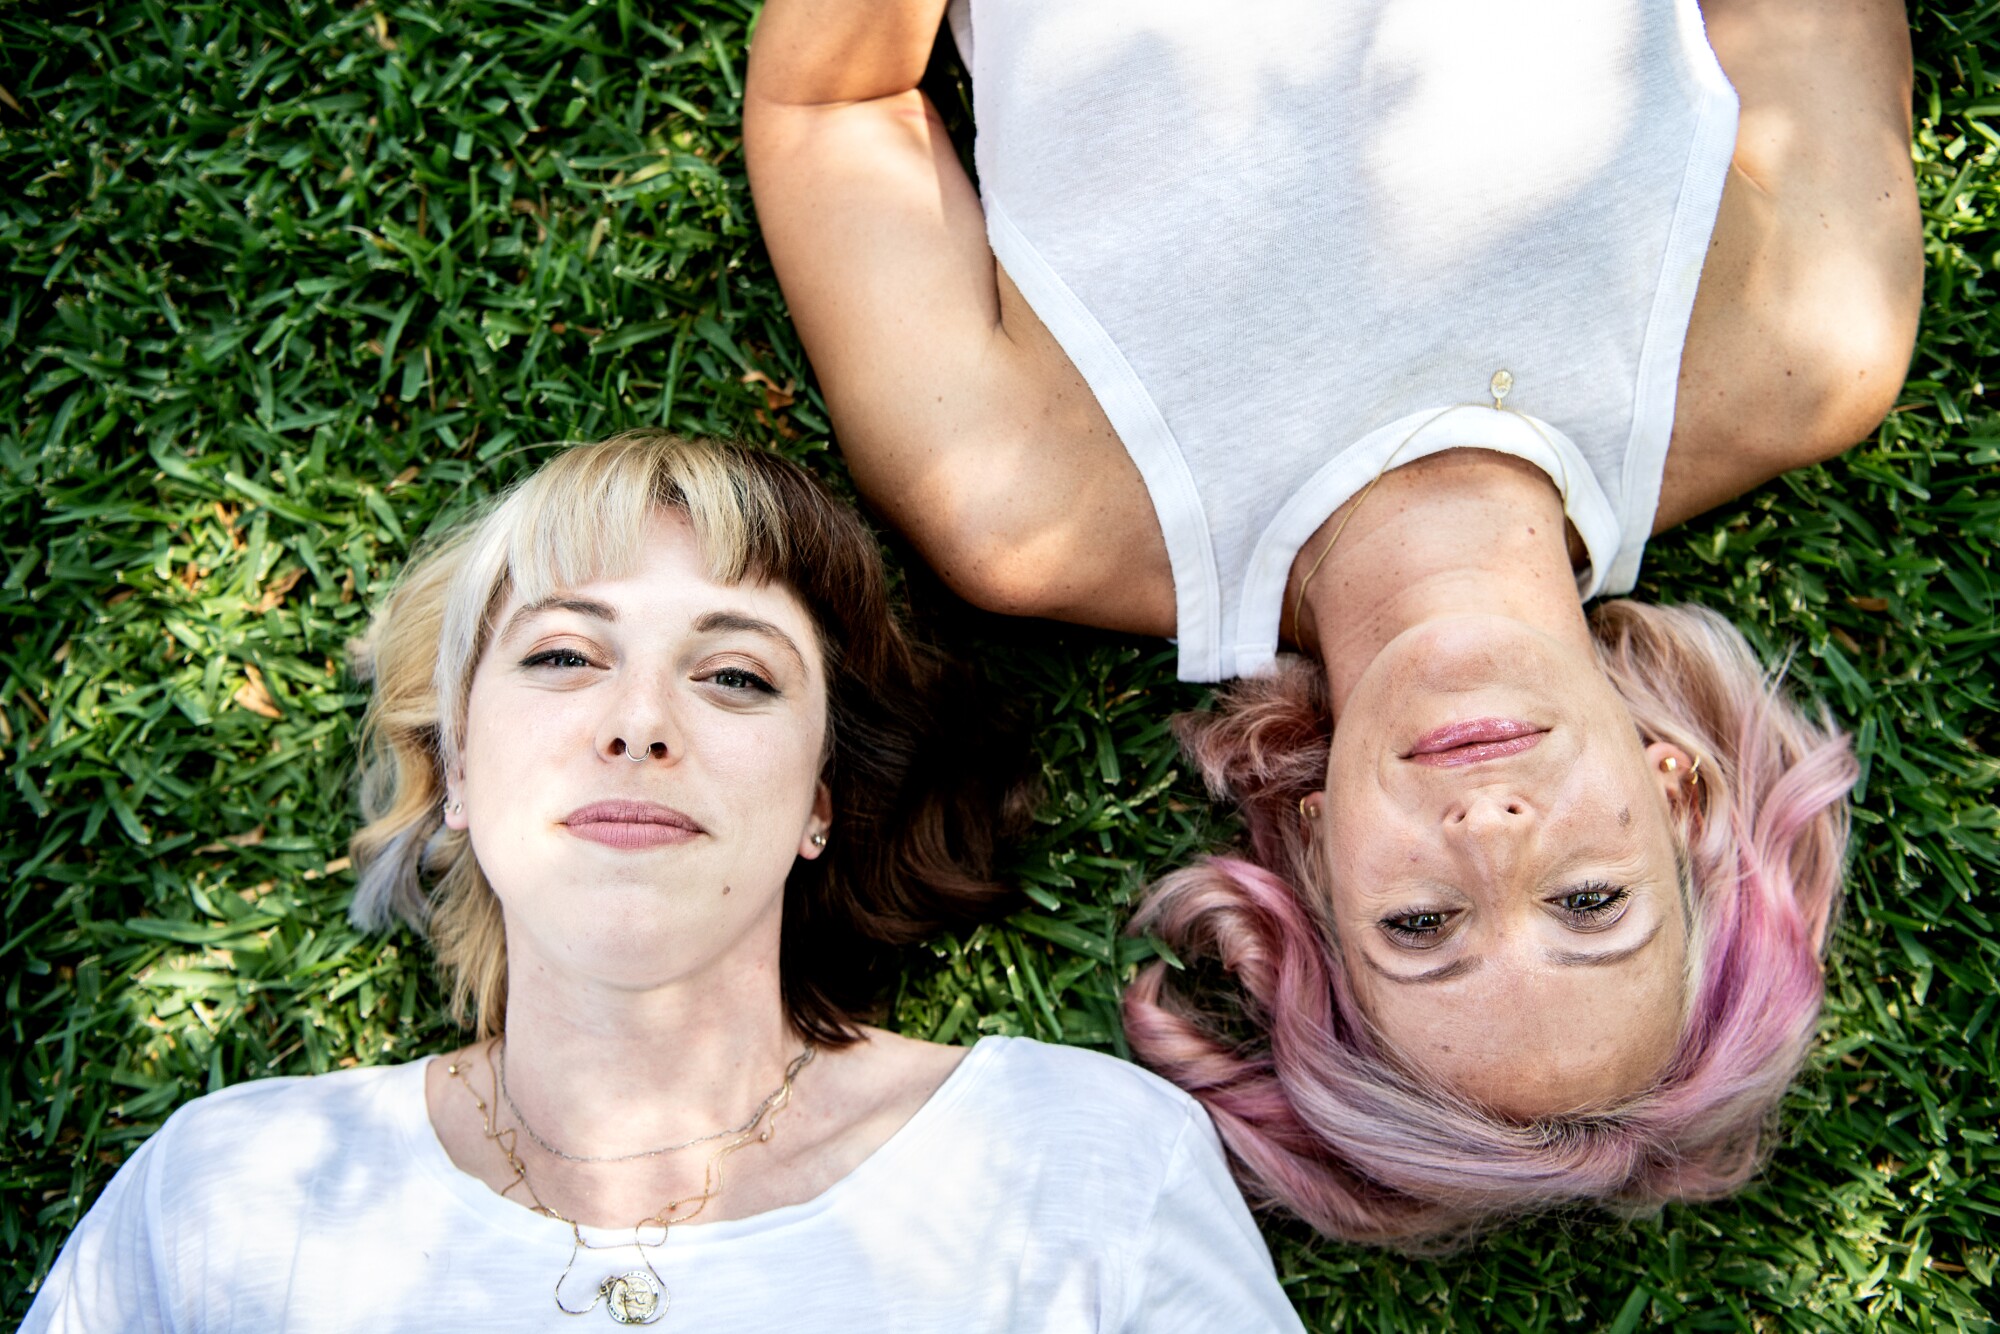 Two women lie on grass in the shade.